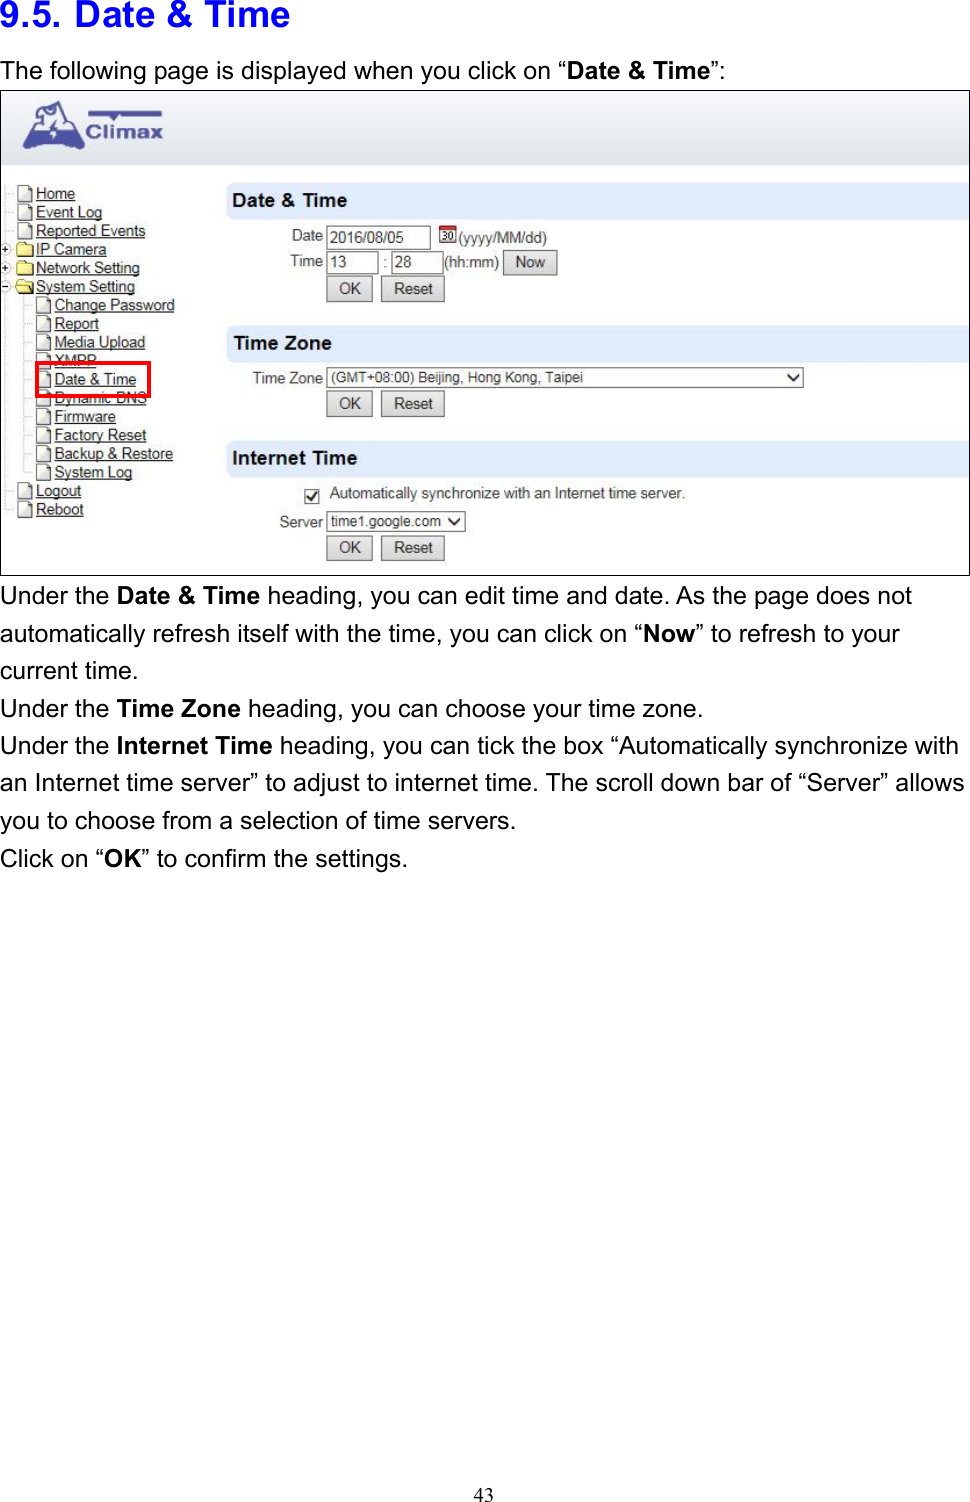 43  9.5. Date &amp; Time The following page is displayed when you click on “Date &amp; Time”:  Under the Date &amp; Time heading, you can edit time and date. As the page does not automatically refresh itself with the time, you can click on “Now” to refresh to your current time. Under the Time Zone heading, you can choose your time zone. Under the Internet Time heading, you can tick the box “Automatically synchronize with an Internet time server” to adjust to internet time. The scroll down bar of “Server” allows you to choose from a selection of time servers. Click on “OK” to confirm the settings.  